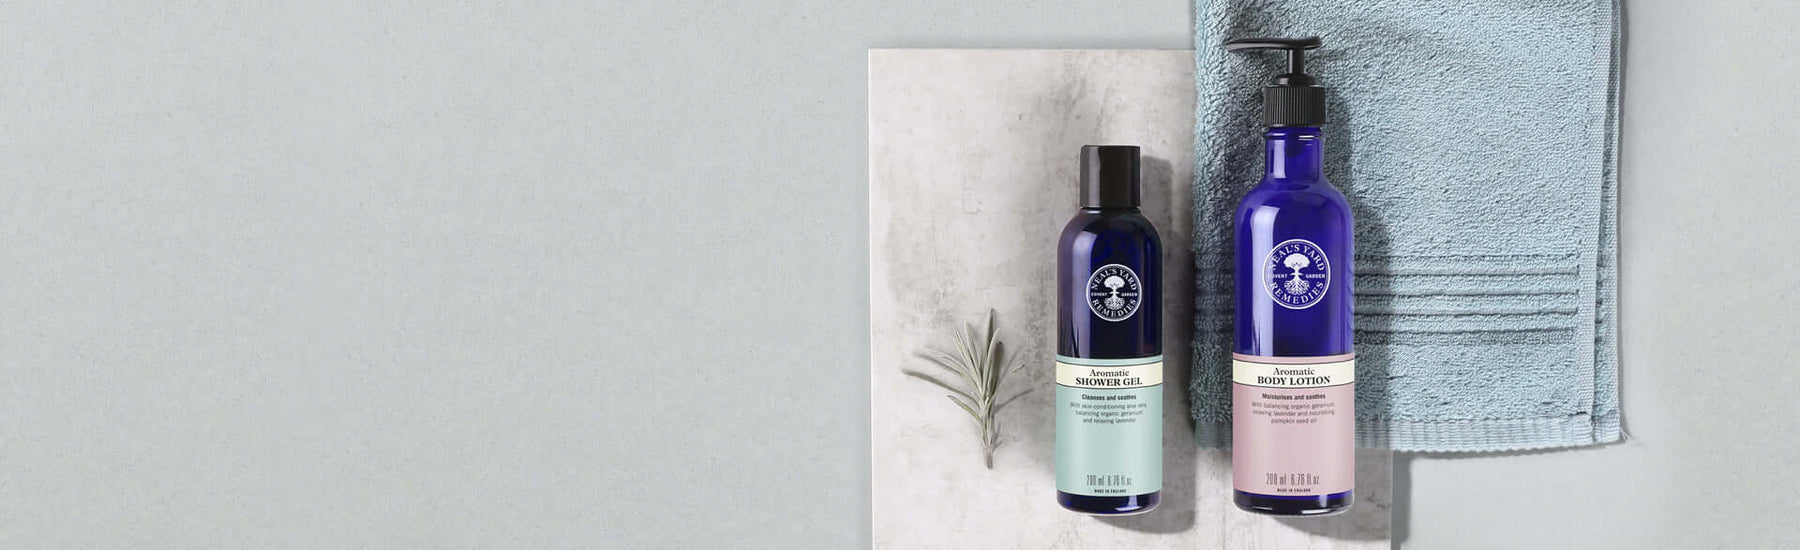 Picture of Aromatic Shower Gel and Body Lotion by Neal's Yard Remedies